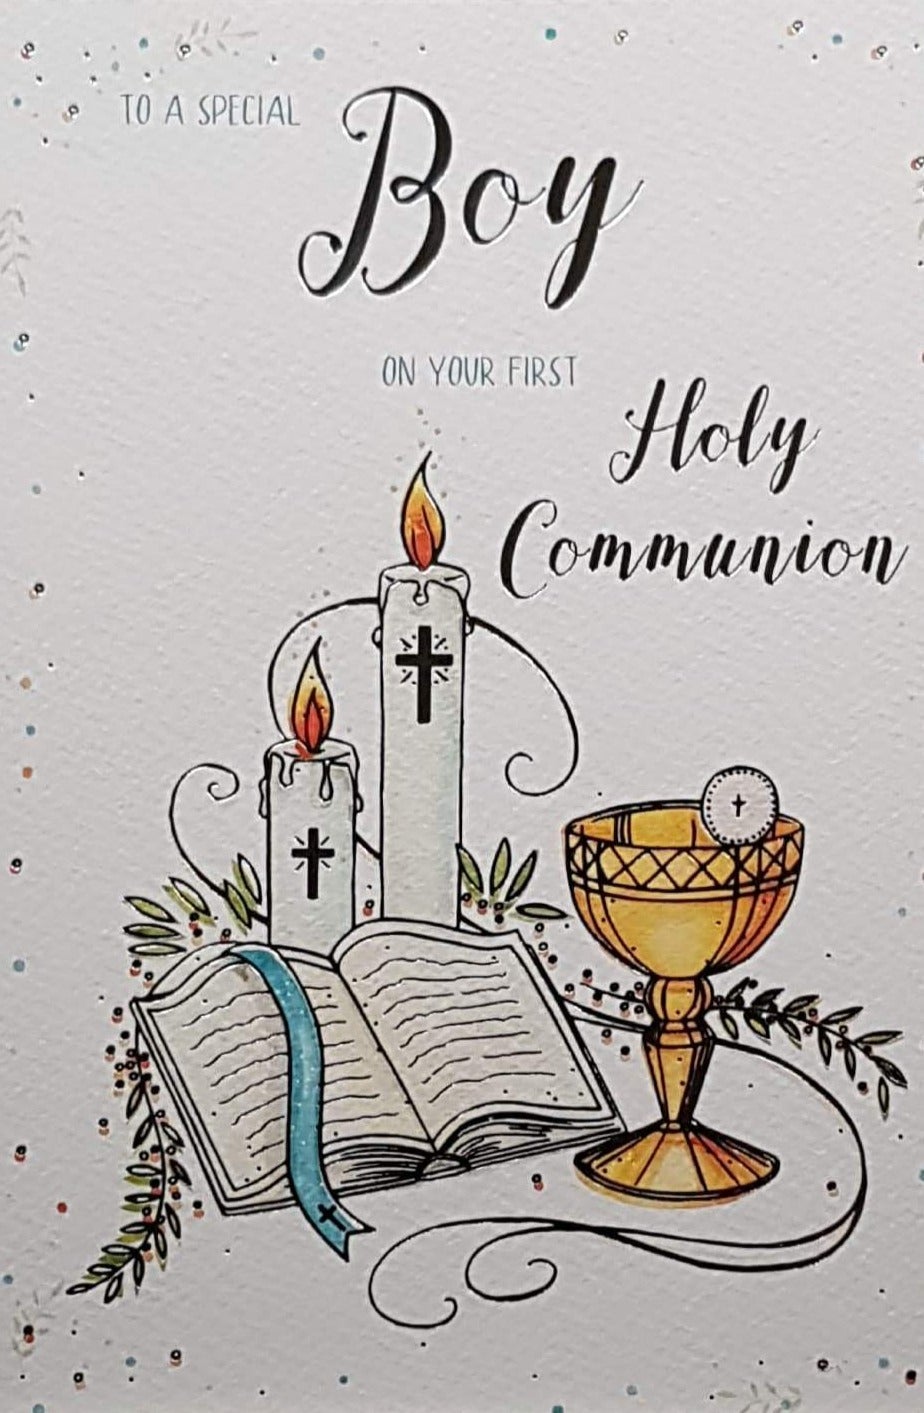 Communion Card - Boy - To A Special Boy & Chalice & Candles on White Background